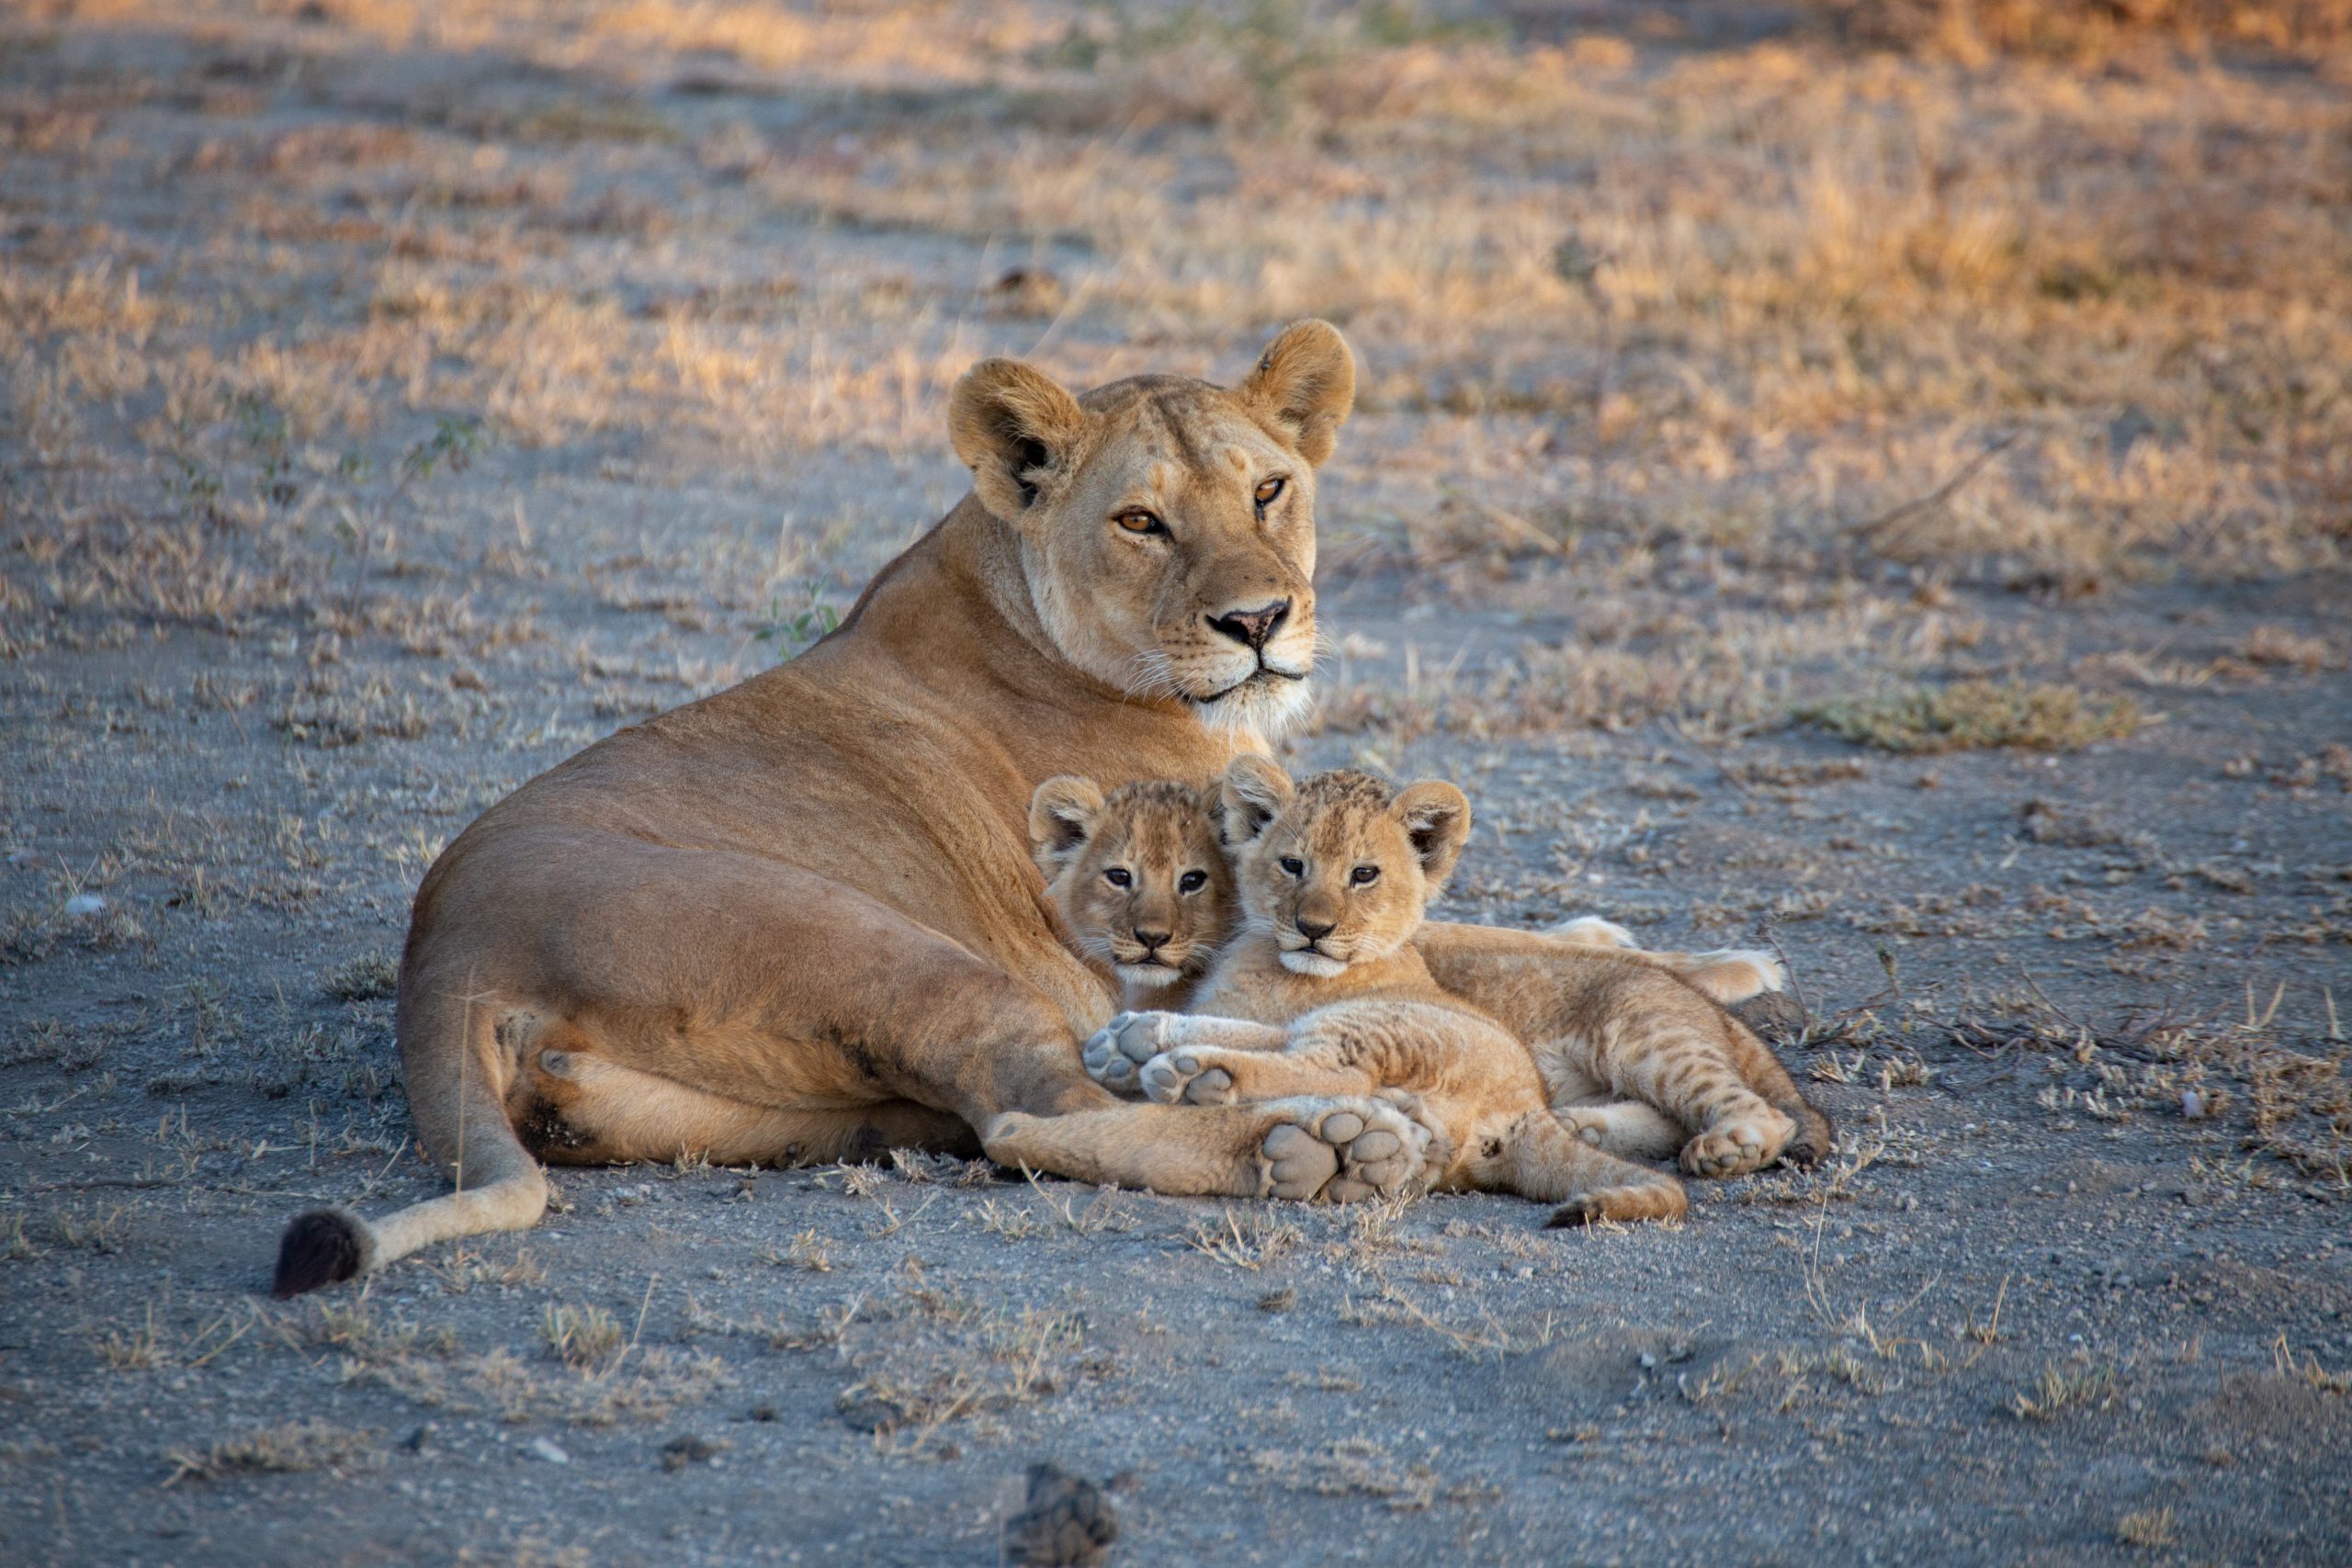 A lioness resting with her two cubs nuzzling next to her.